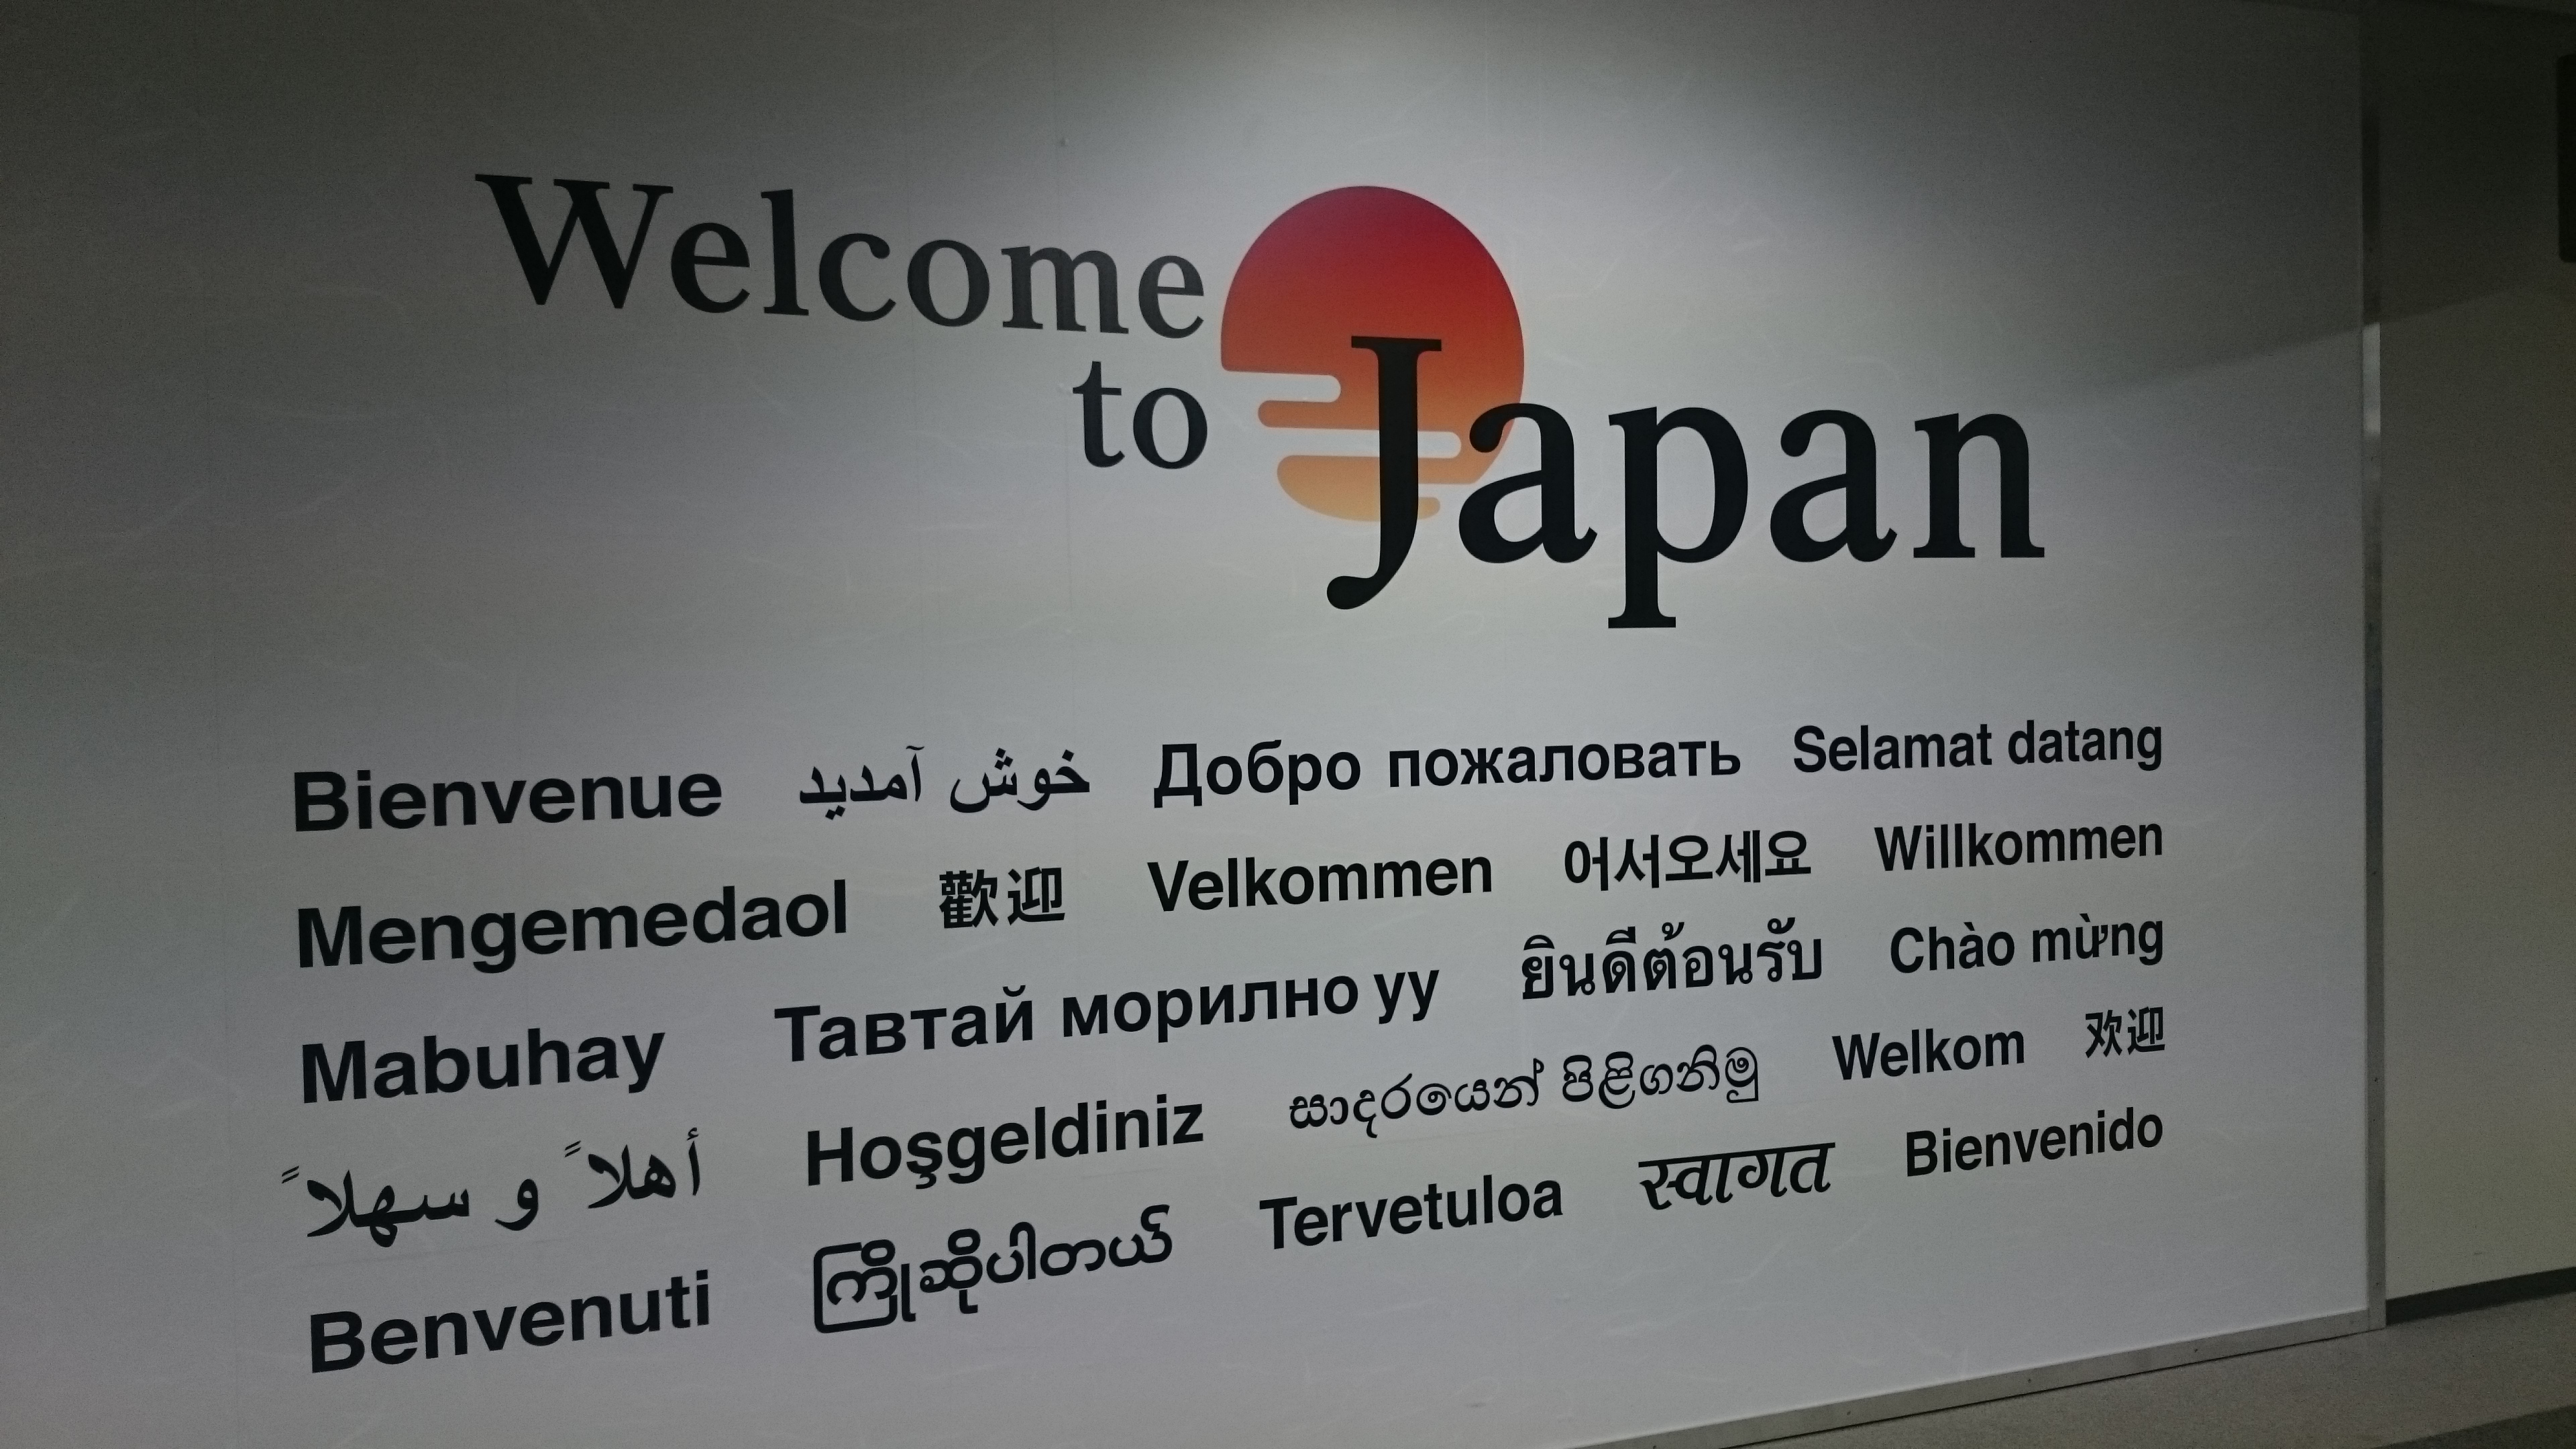 How to apply for Japan visa in the Philippines